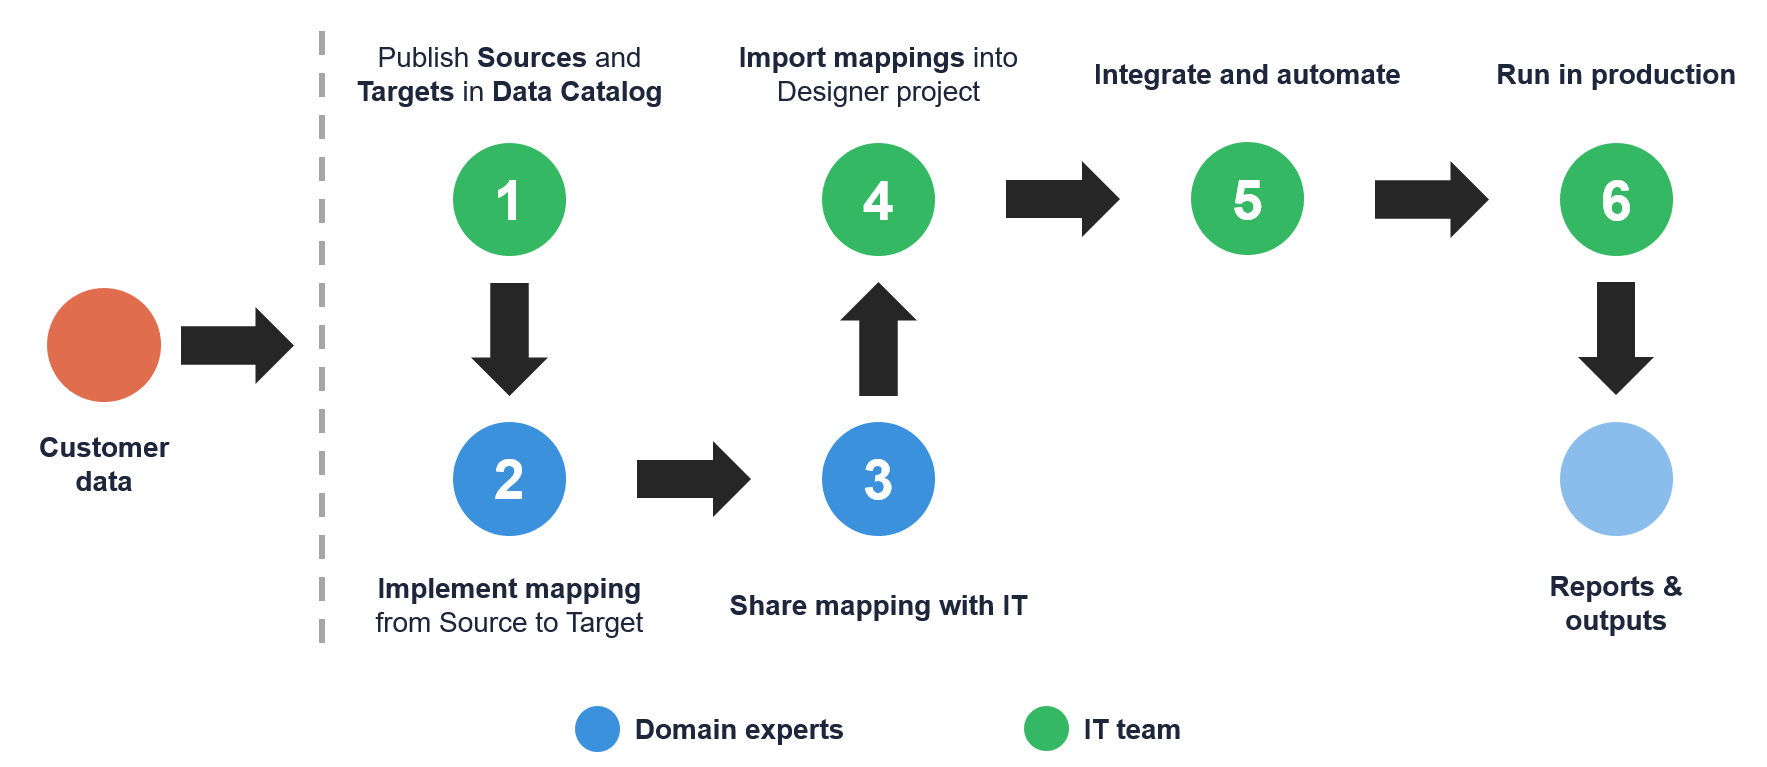 Diagram showing steps Domain experts and IT team must take in order to integrate Wrangler mappings into Designer-built project.